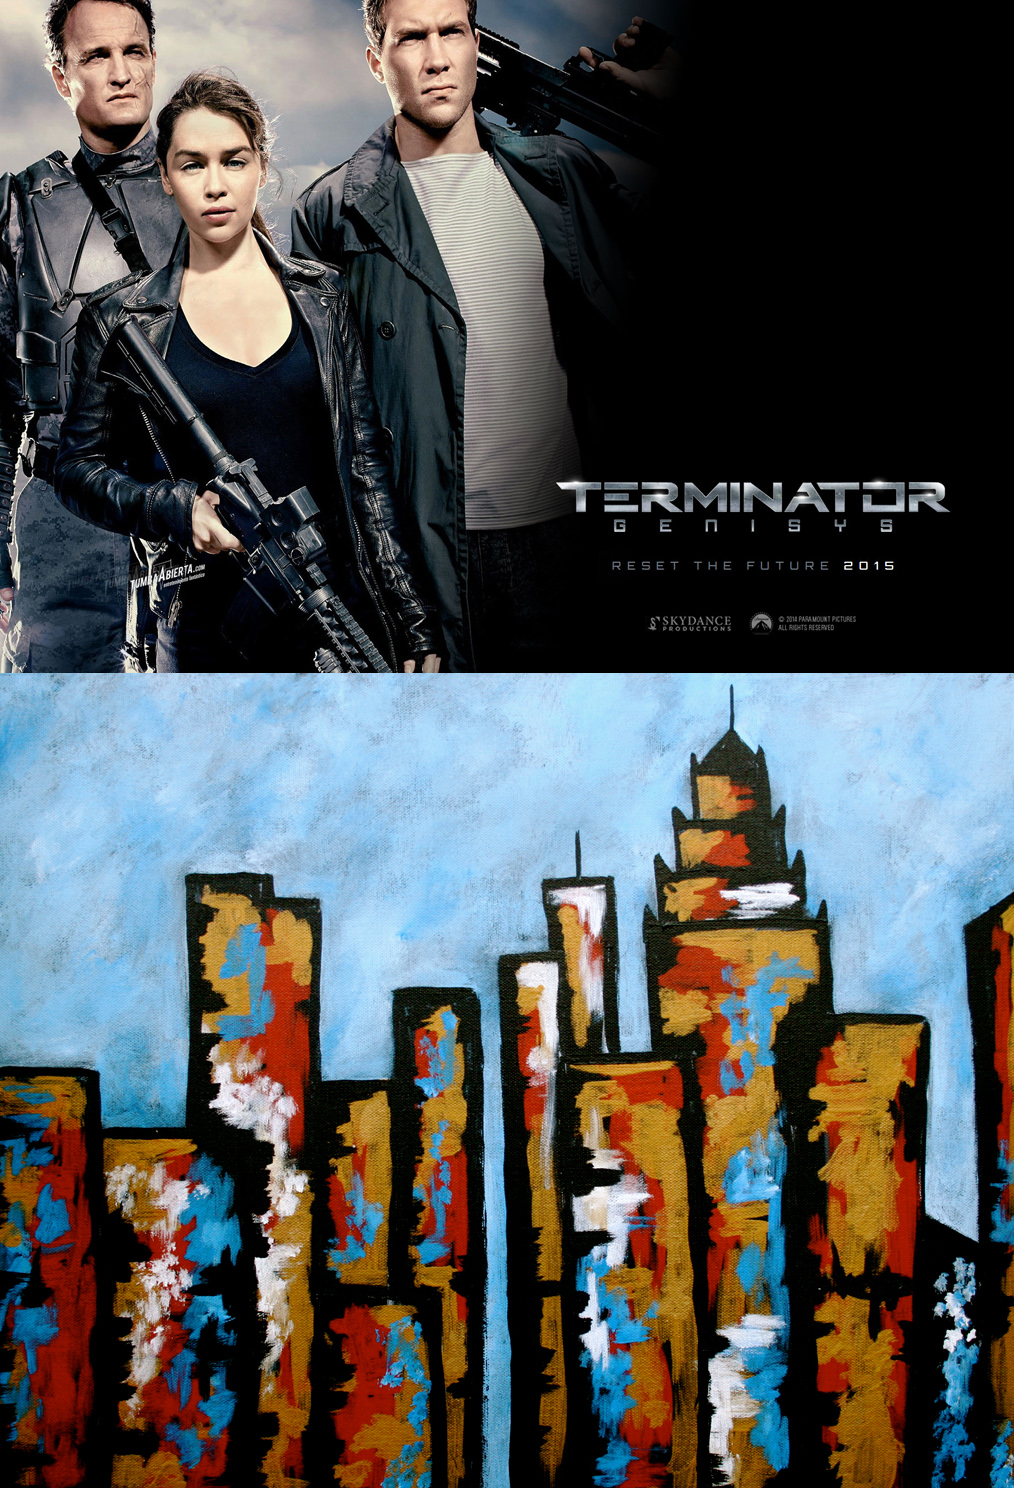 Pinot’s Palette Partners with Terminator Genisys Theatrical Release